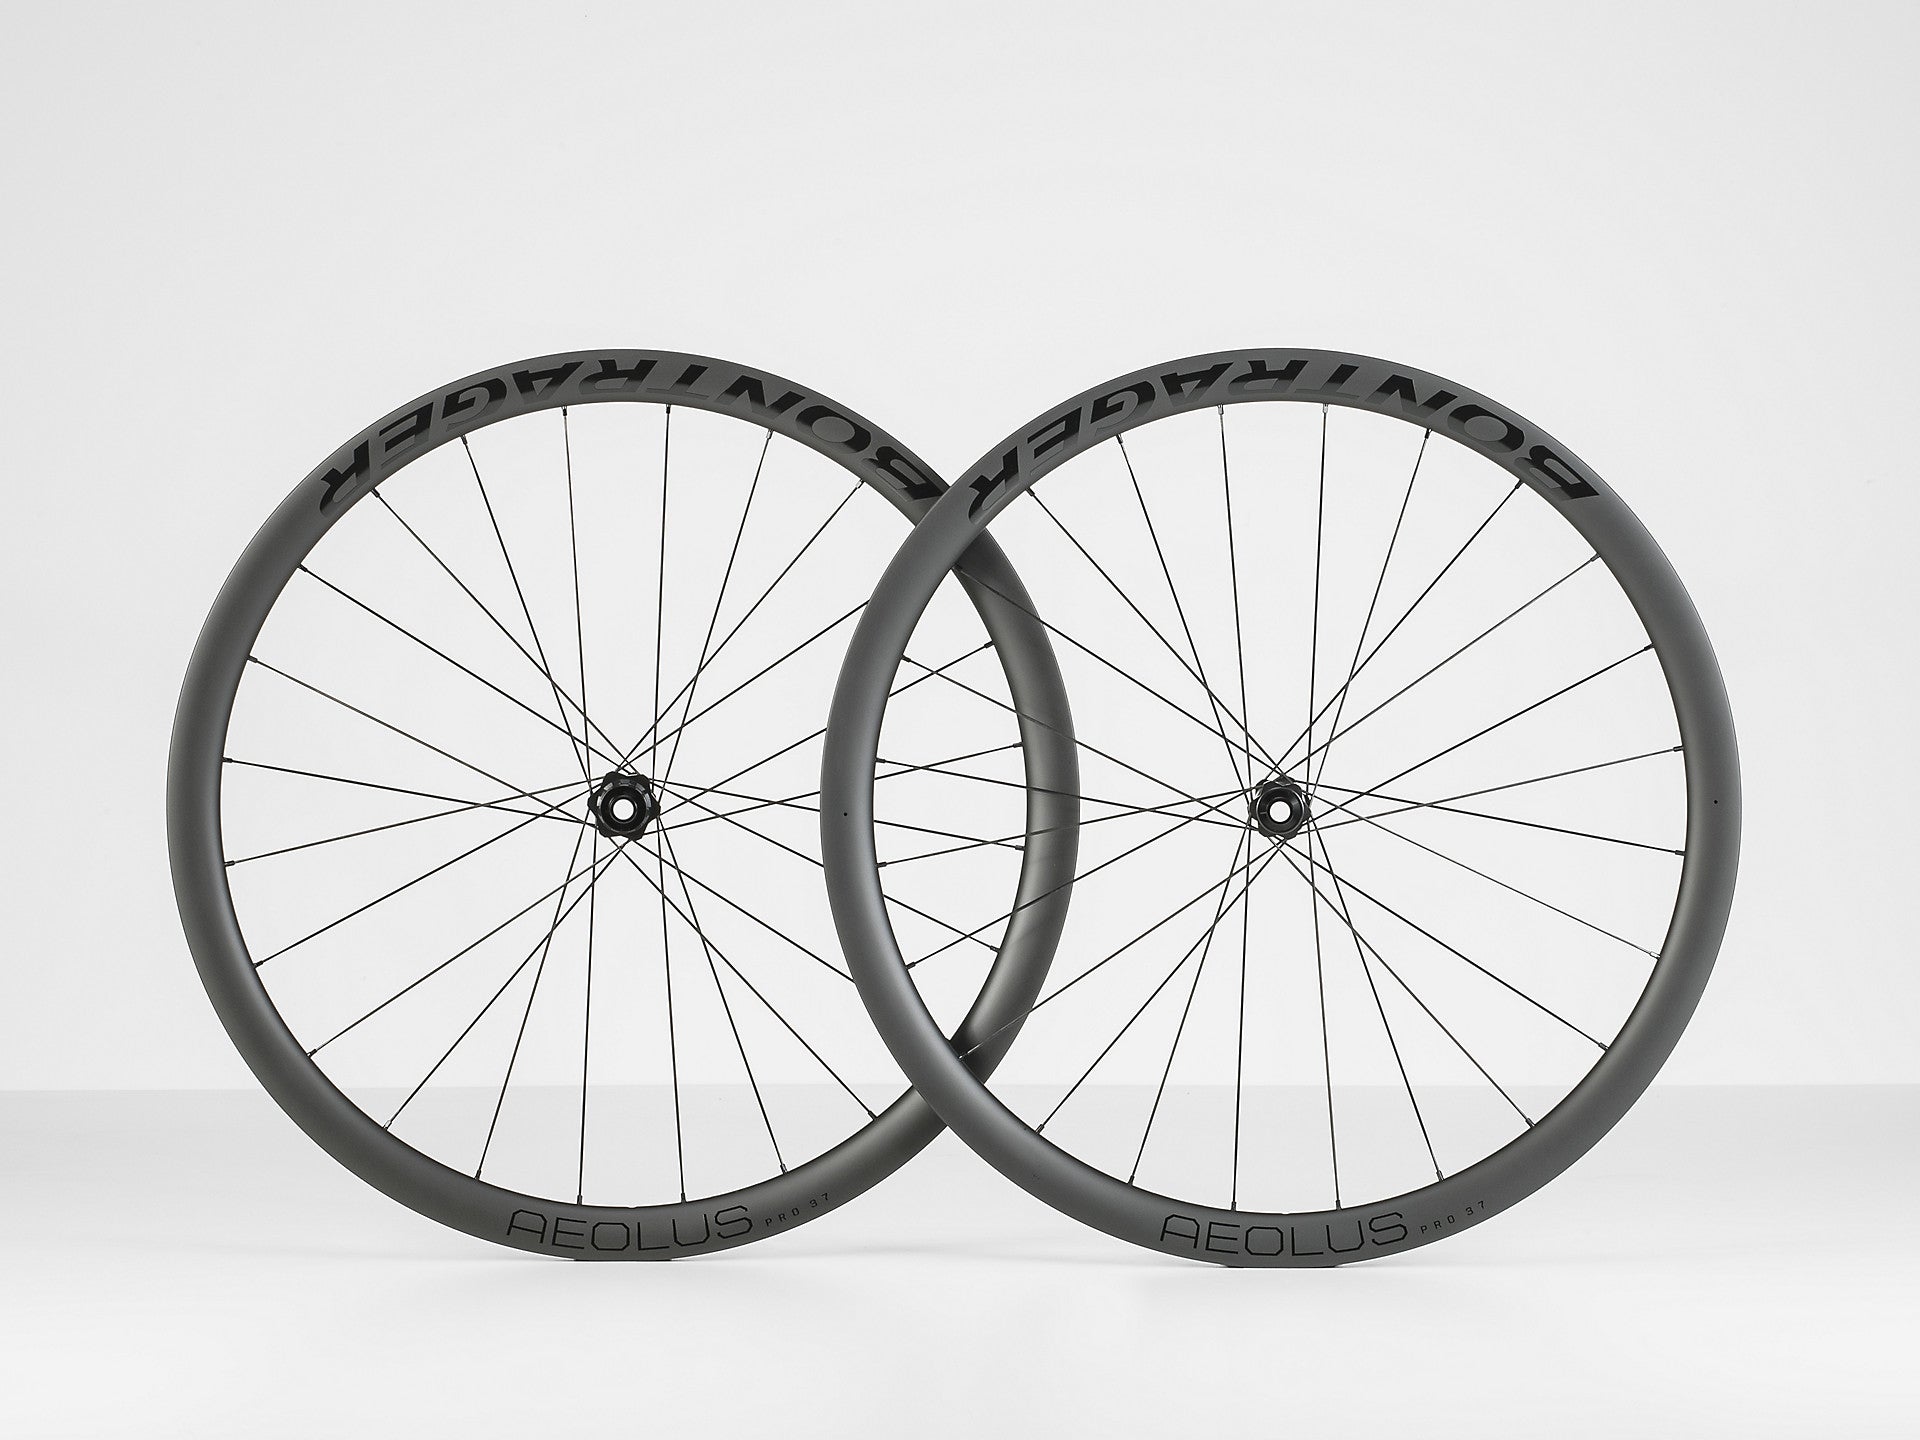 Bontrager Aeolus Pro 37 Wheels both rear and front with a white background